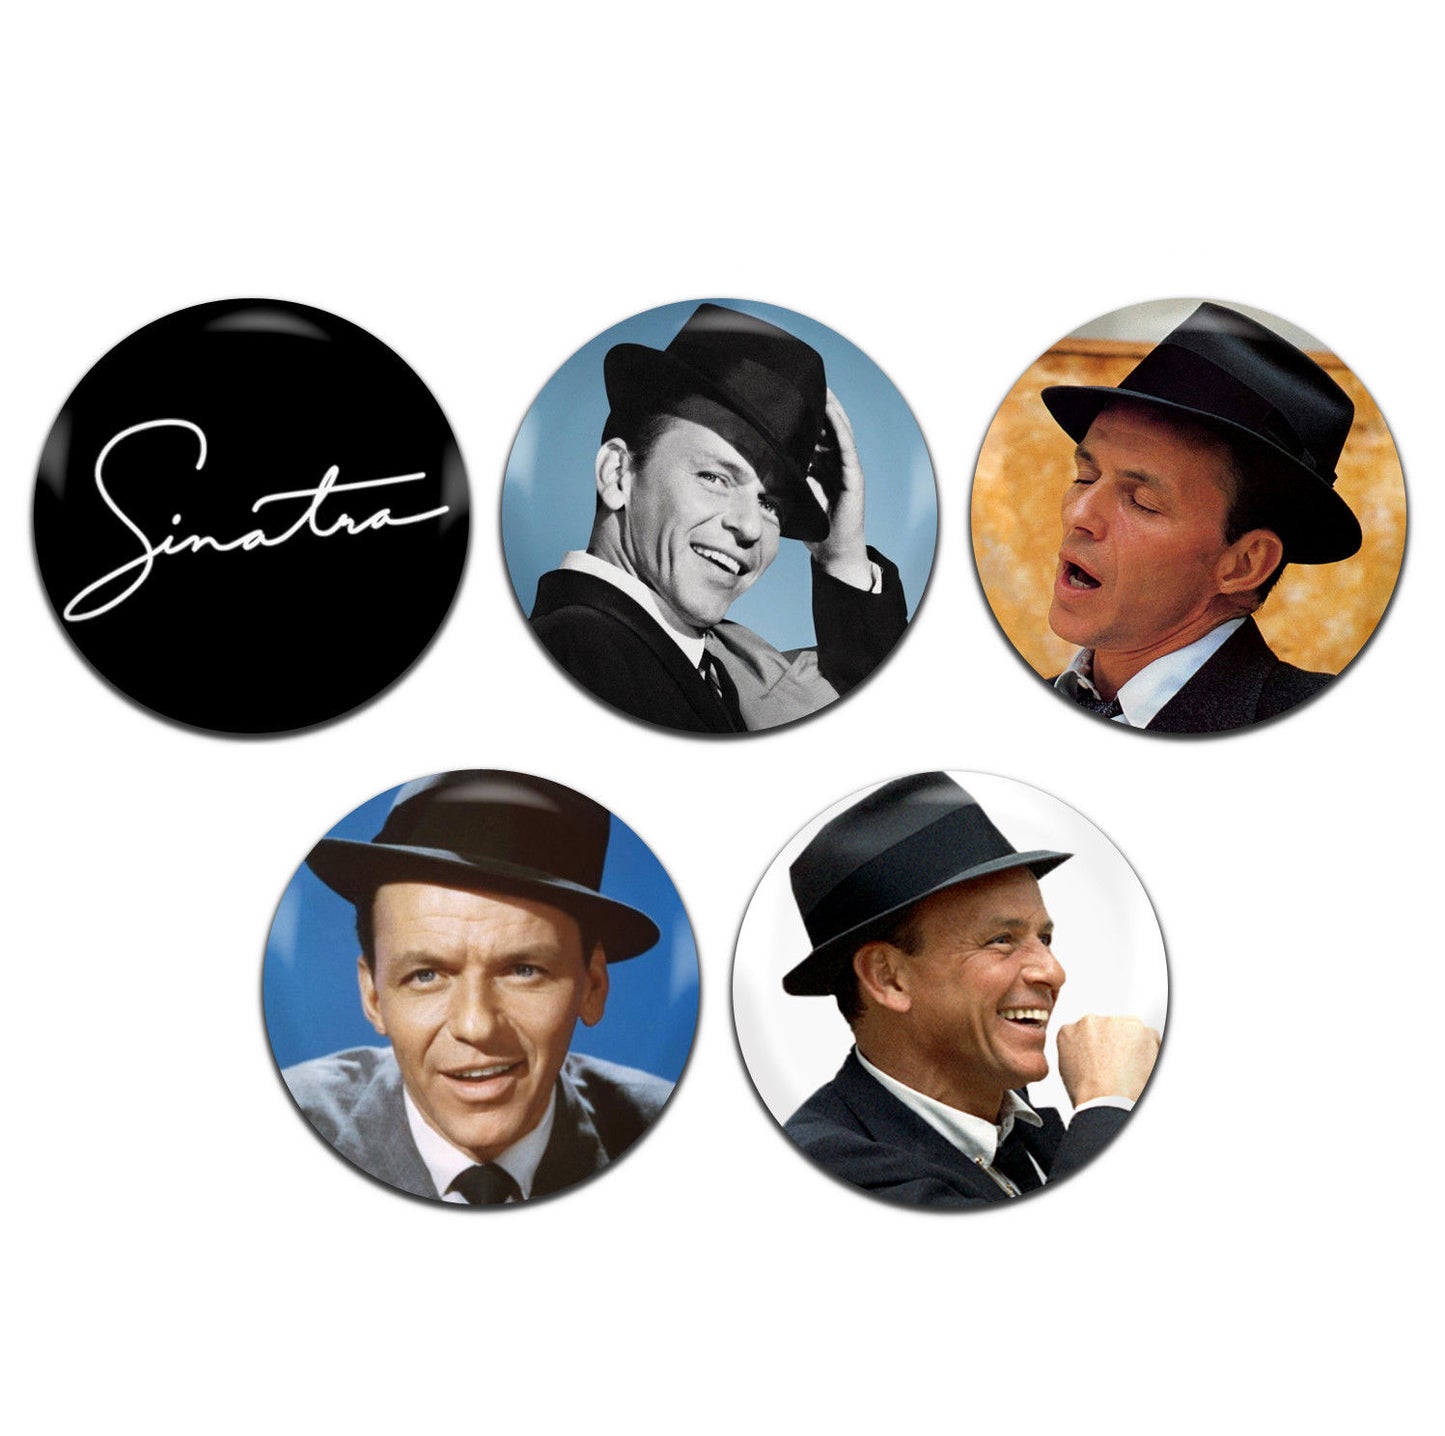 Frank Sinatra Singer Actor 40's 50's 60's 25mm / 1 Inch D-Pin Button Badges (5x Set)